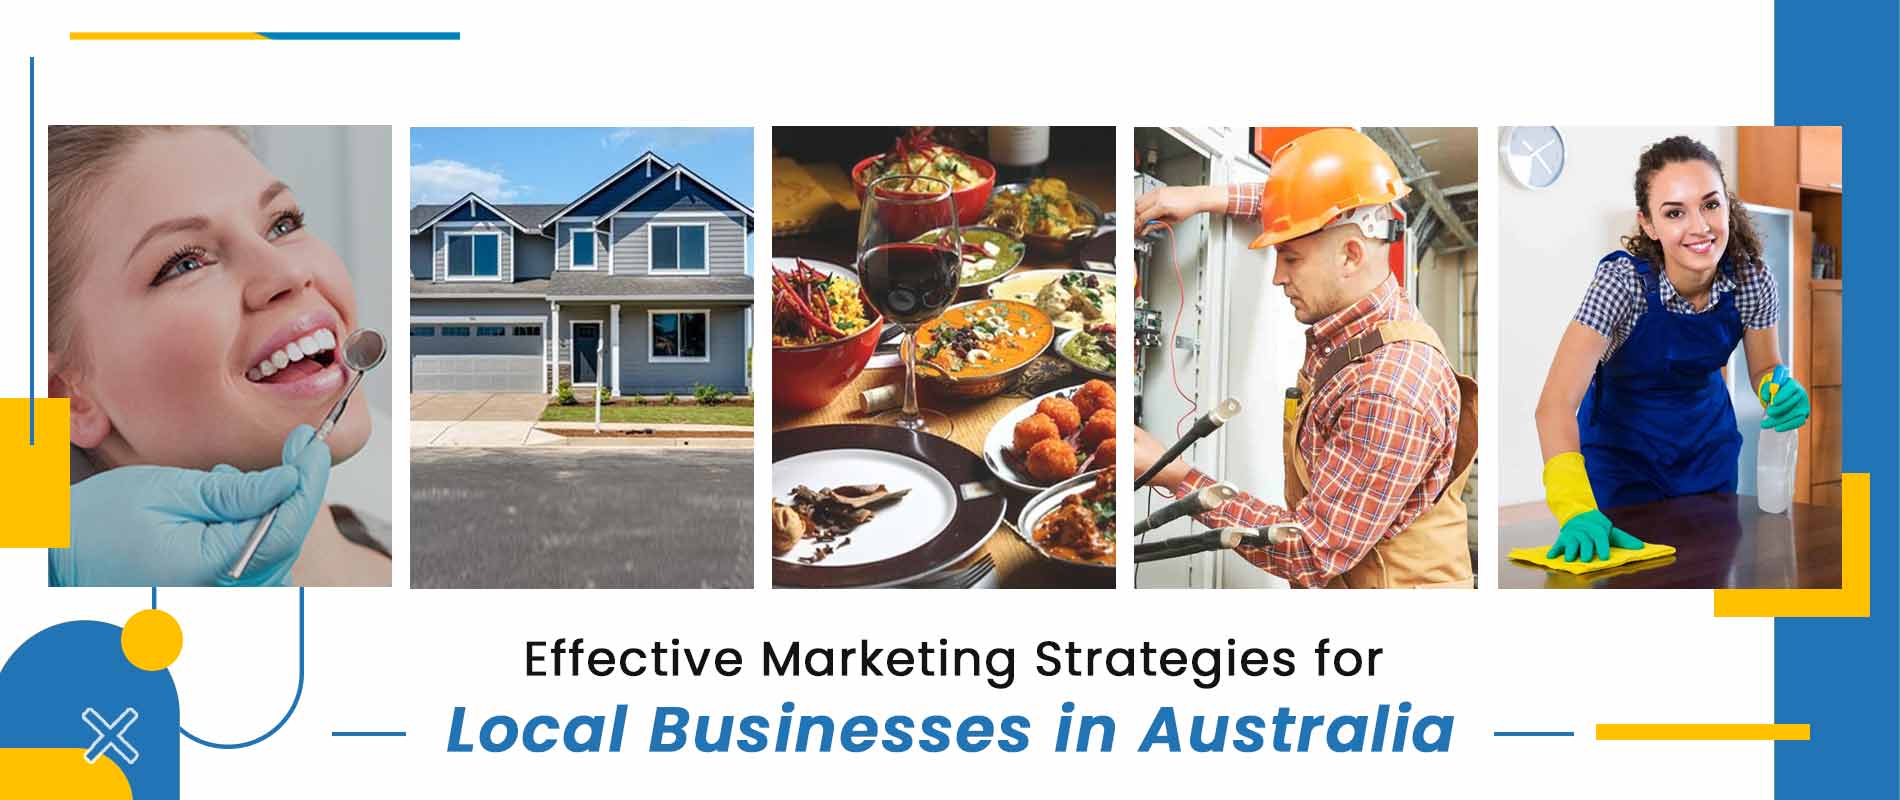 Effective Marketing Strategies for Local Businesses in Australia